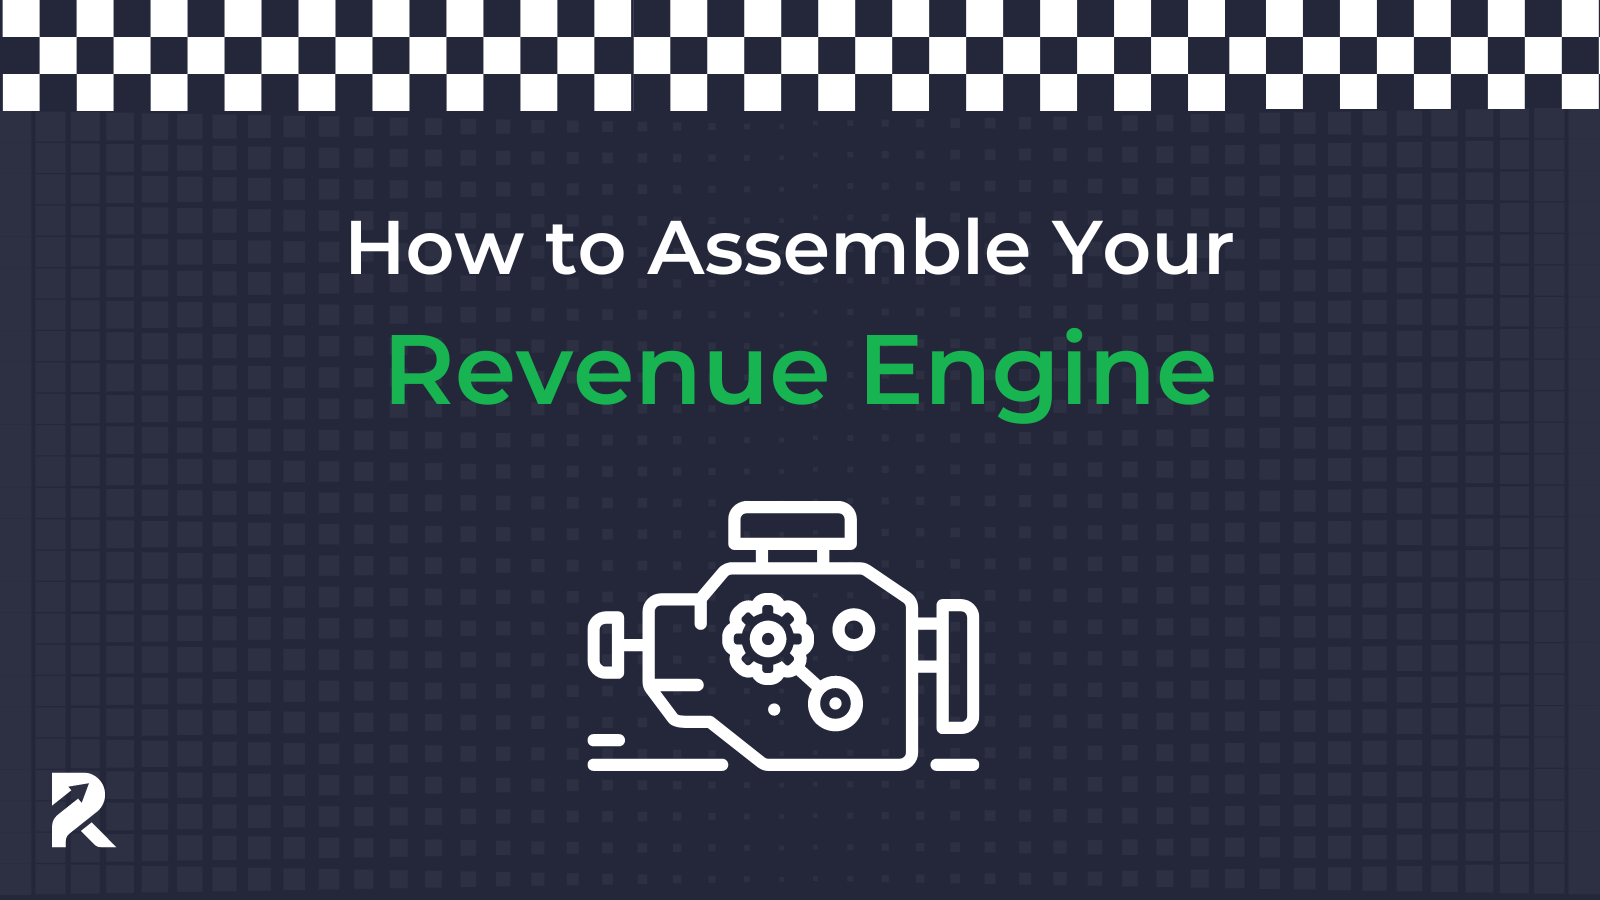 How To: Assemble Your Revenue Engine